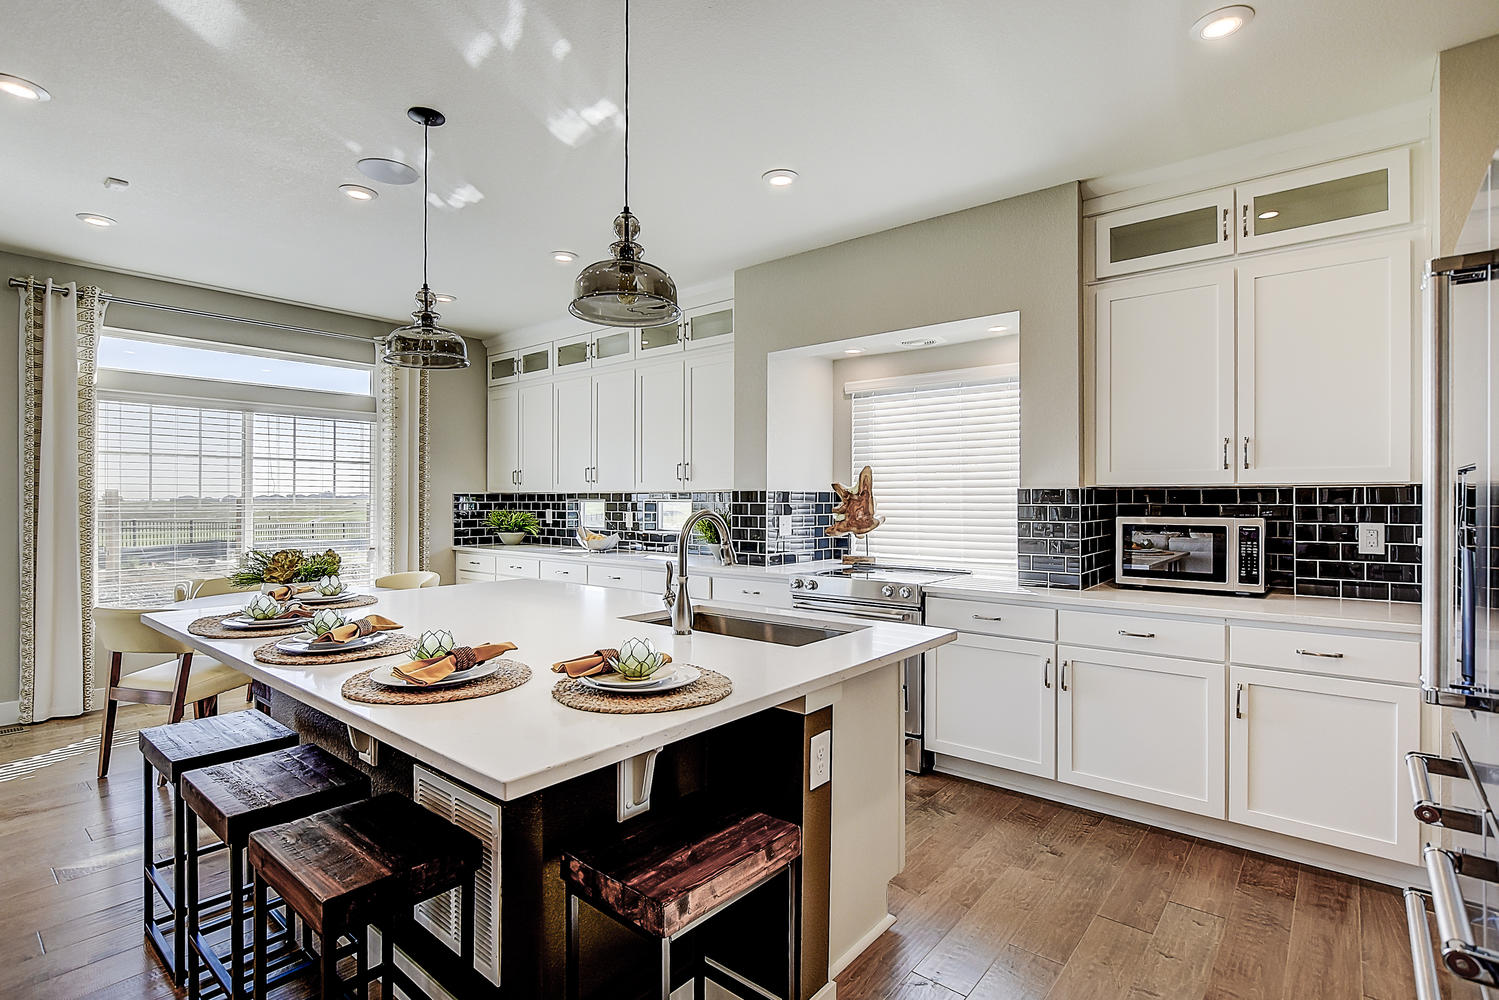 The Opulent Overlook Collection from Oakwood Homes